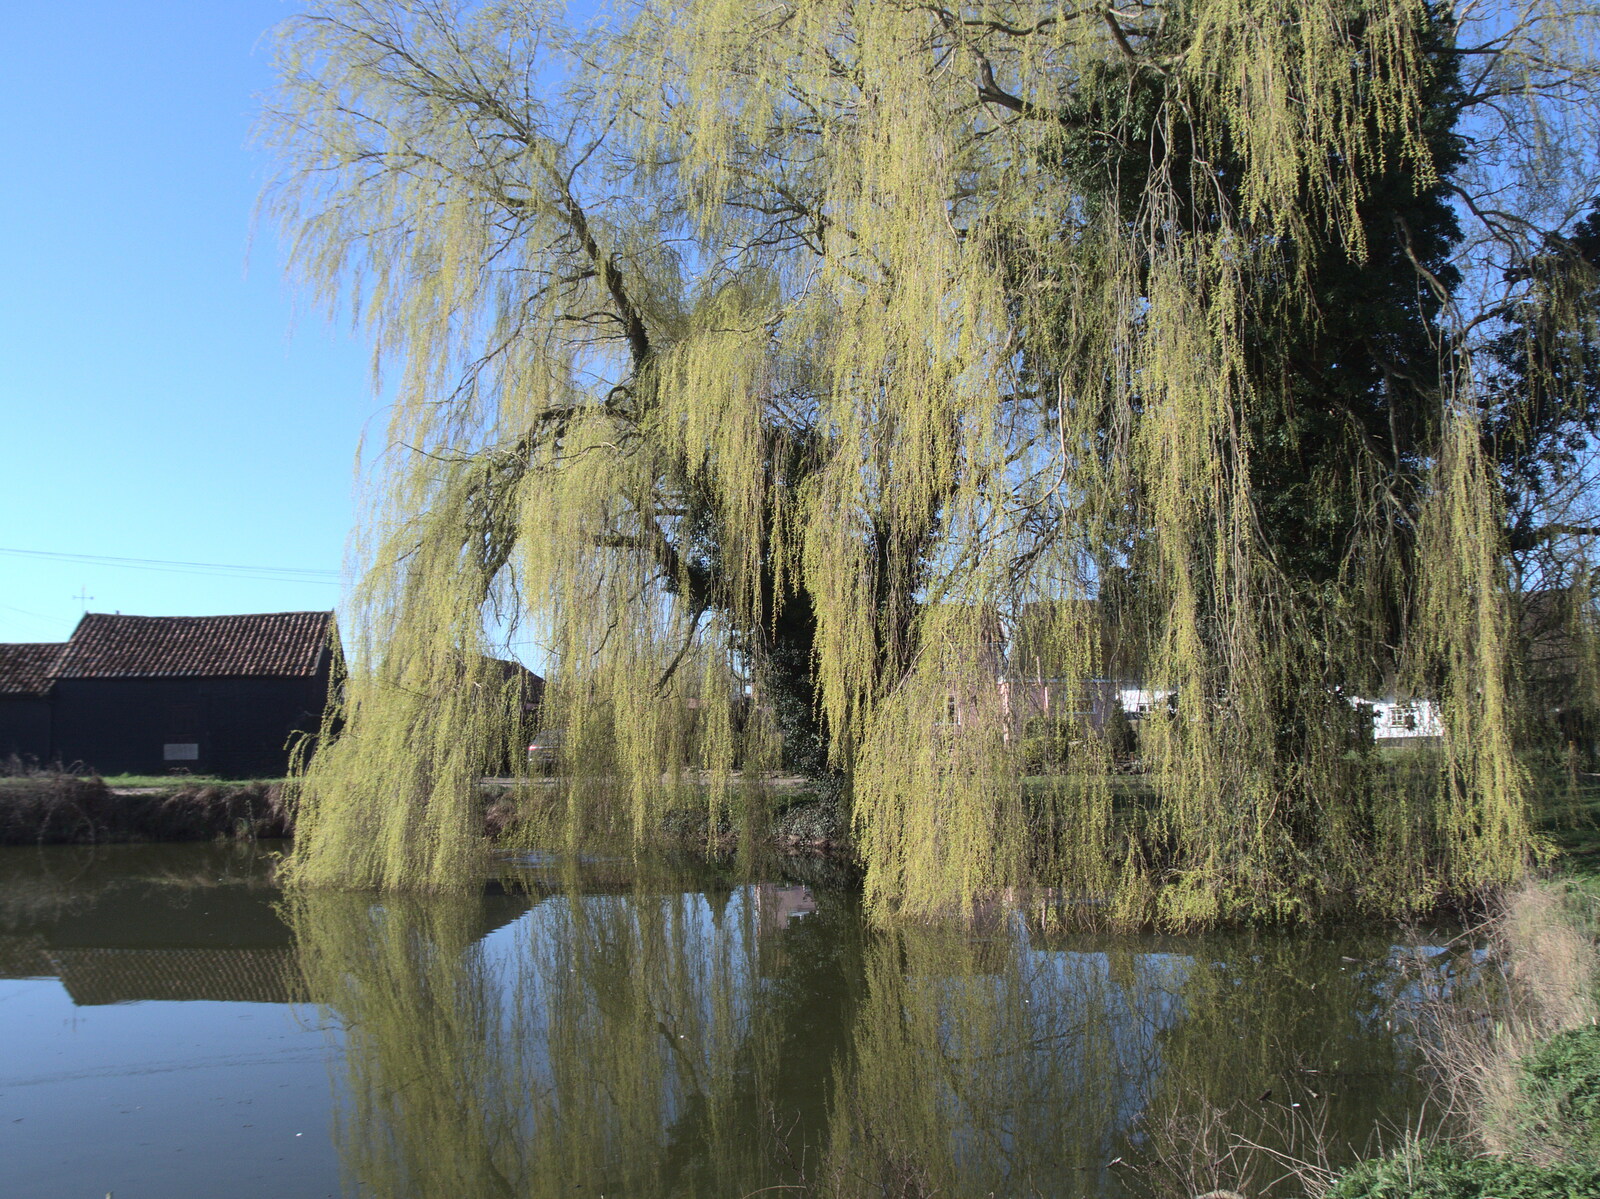 A willow in Thrandeston comes into leaf from Roadworks and Harry's Trampoline, Brome, Suffolk - 6th April 2021